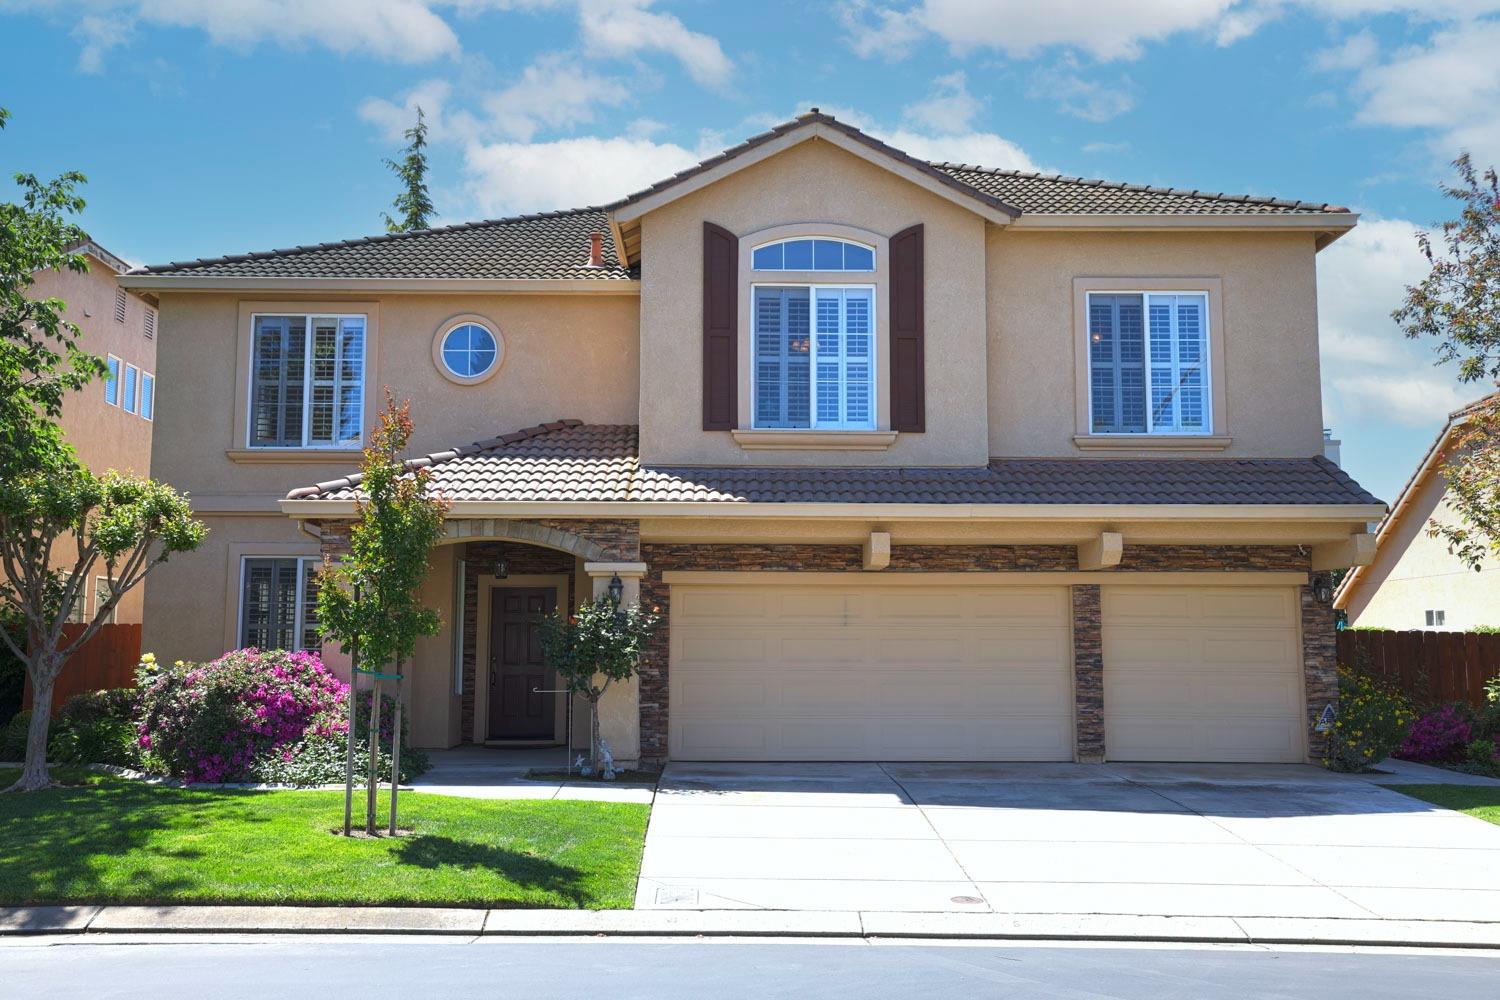 Photo of 1712 St Mayeul Dr in Modesto, CA